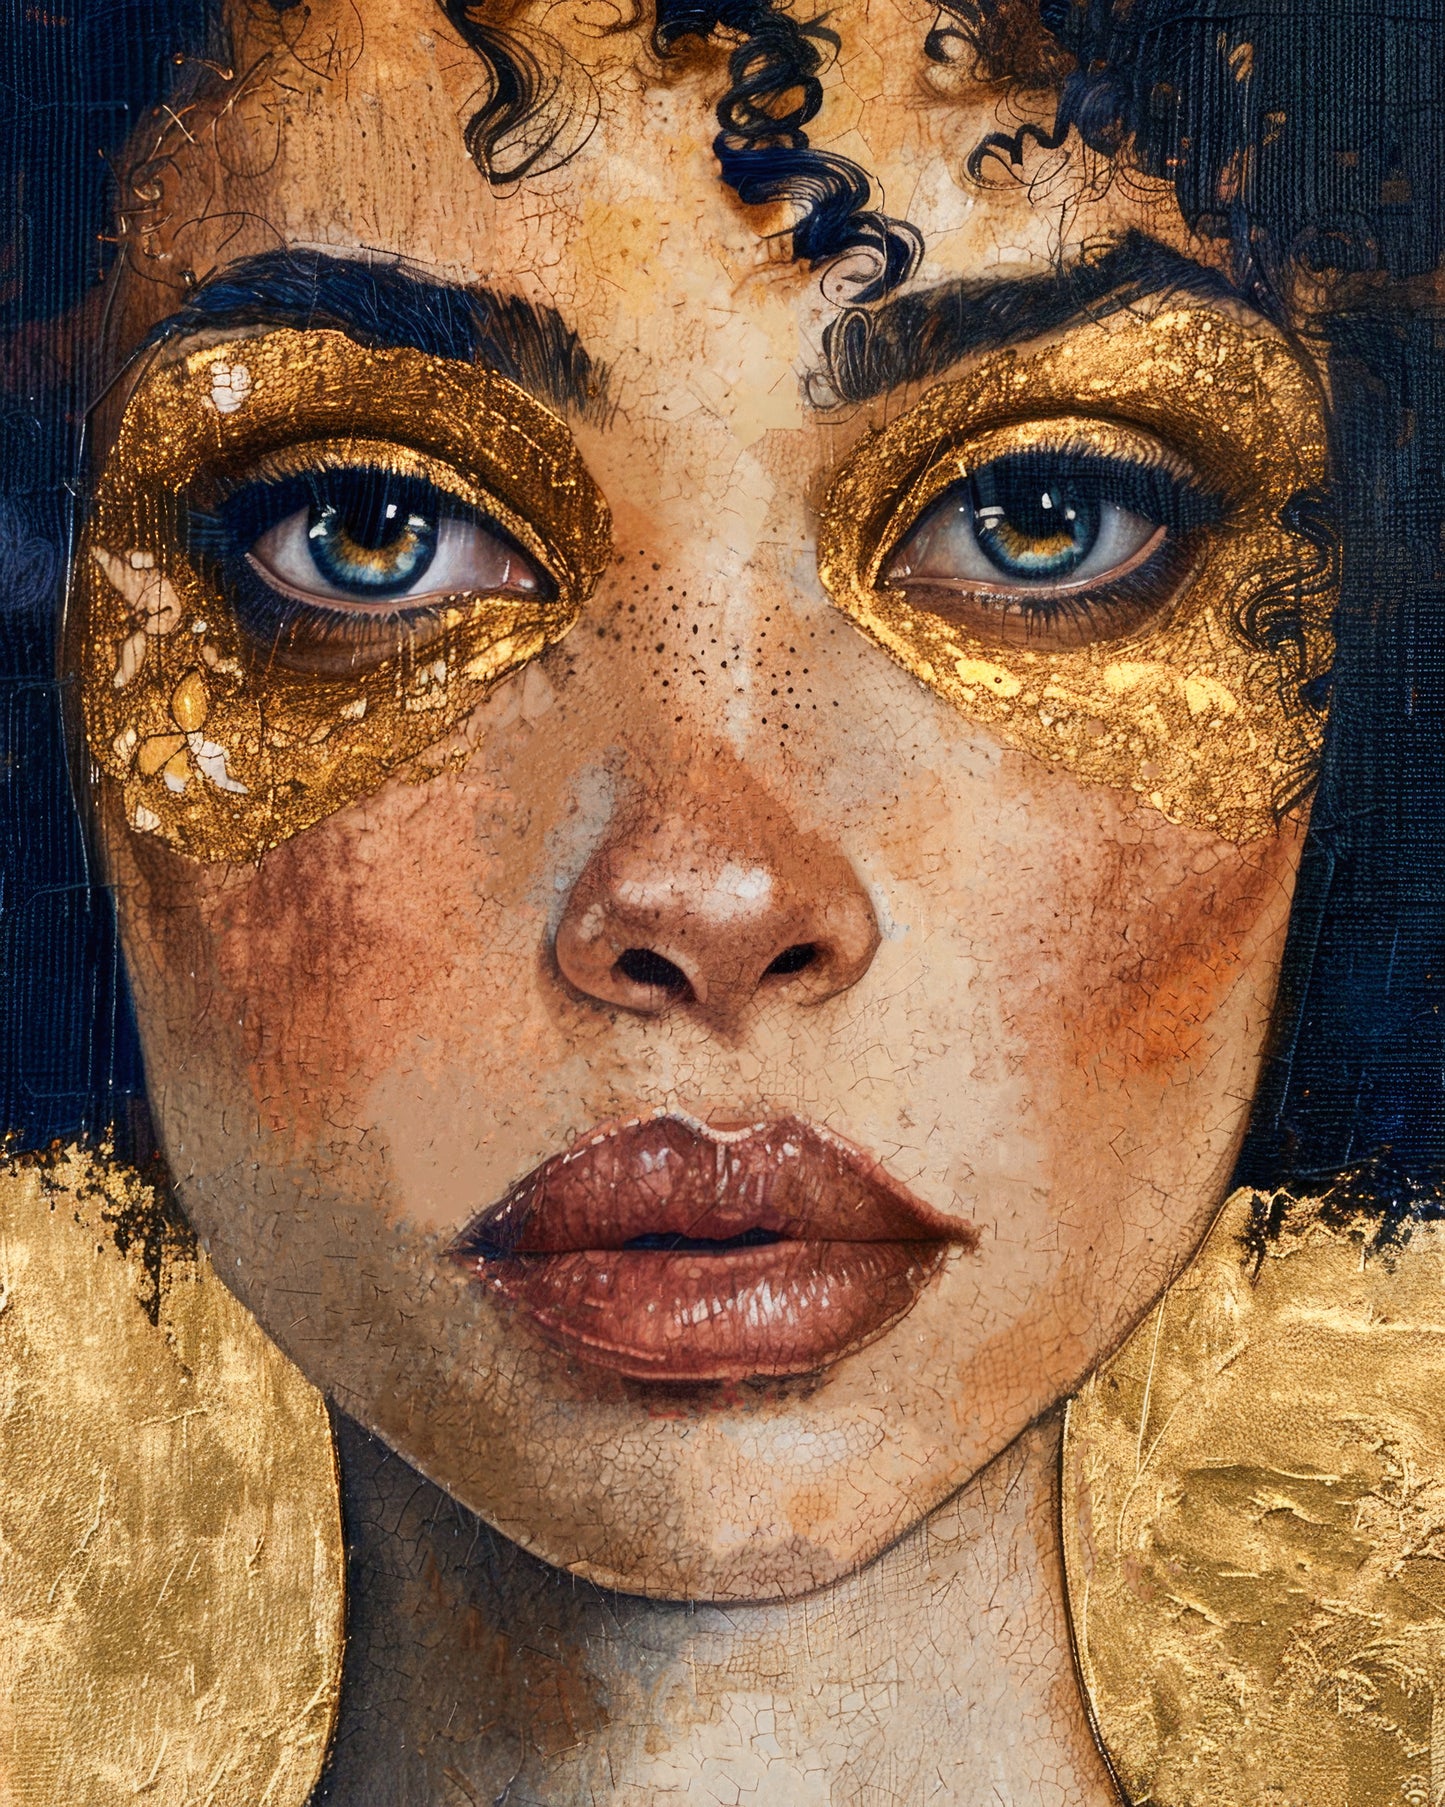 Fine art print of a woman's face with gold eye makeup from the Heart Of Gold collection.